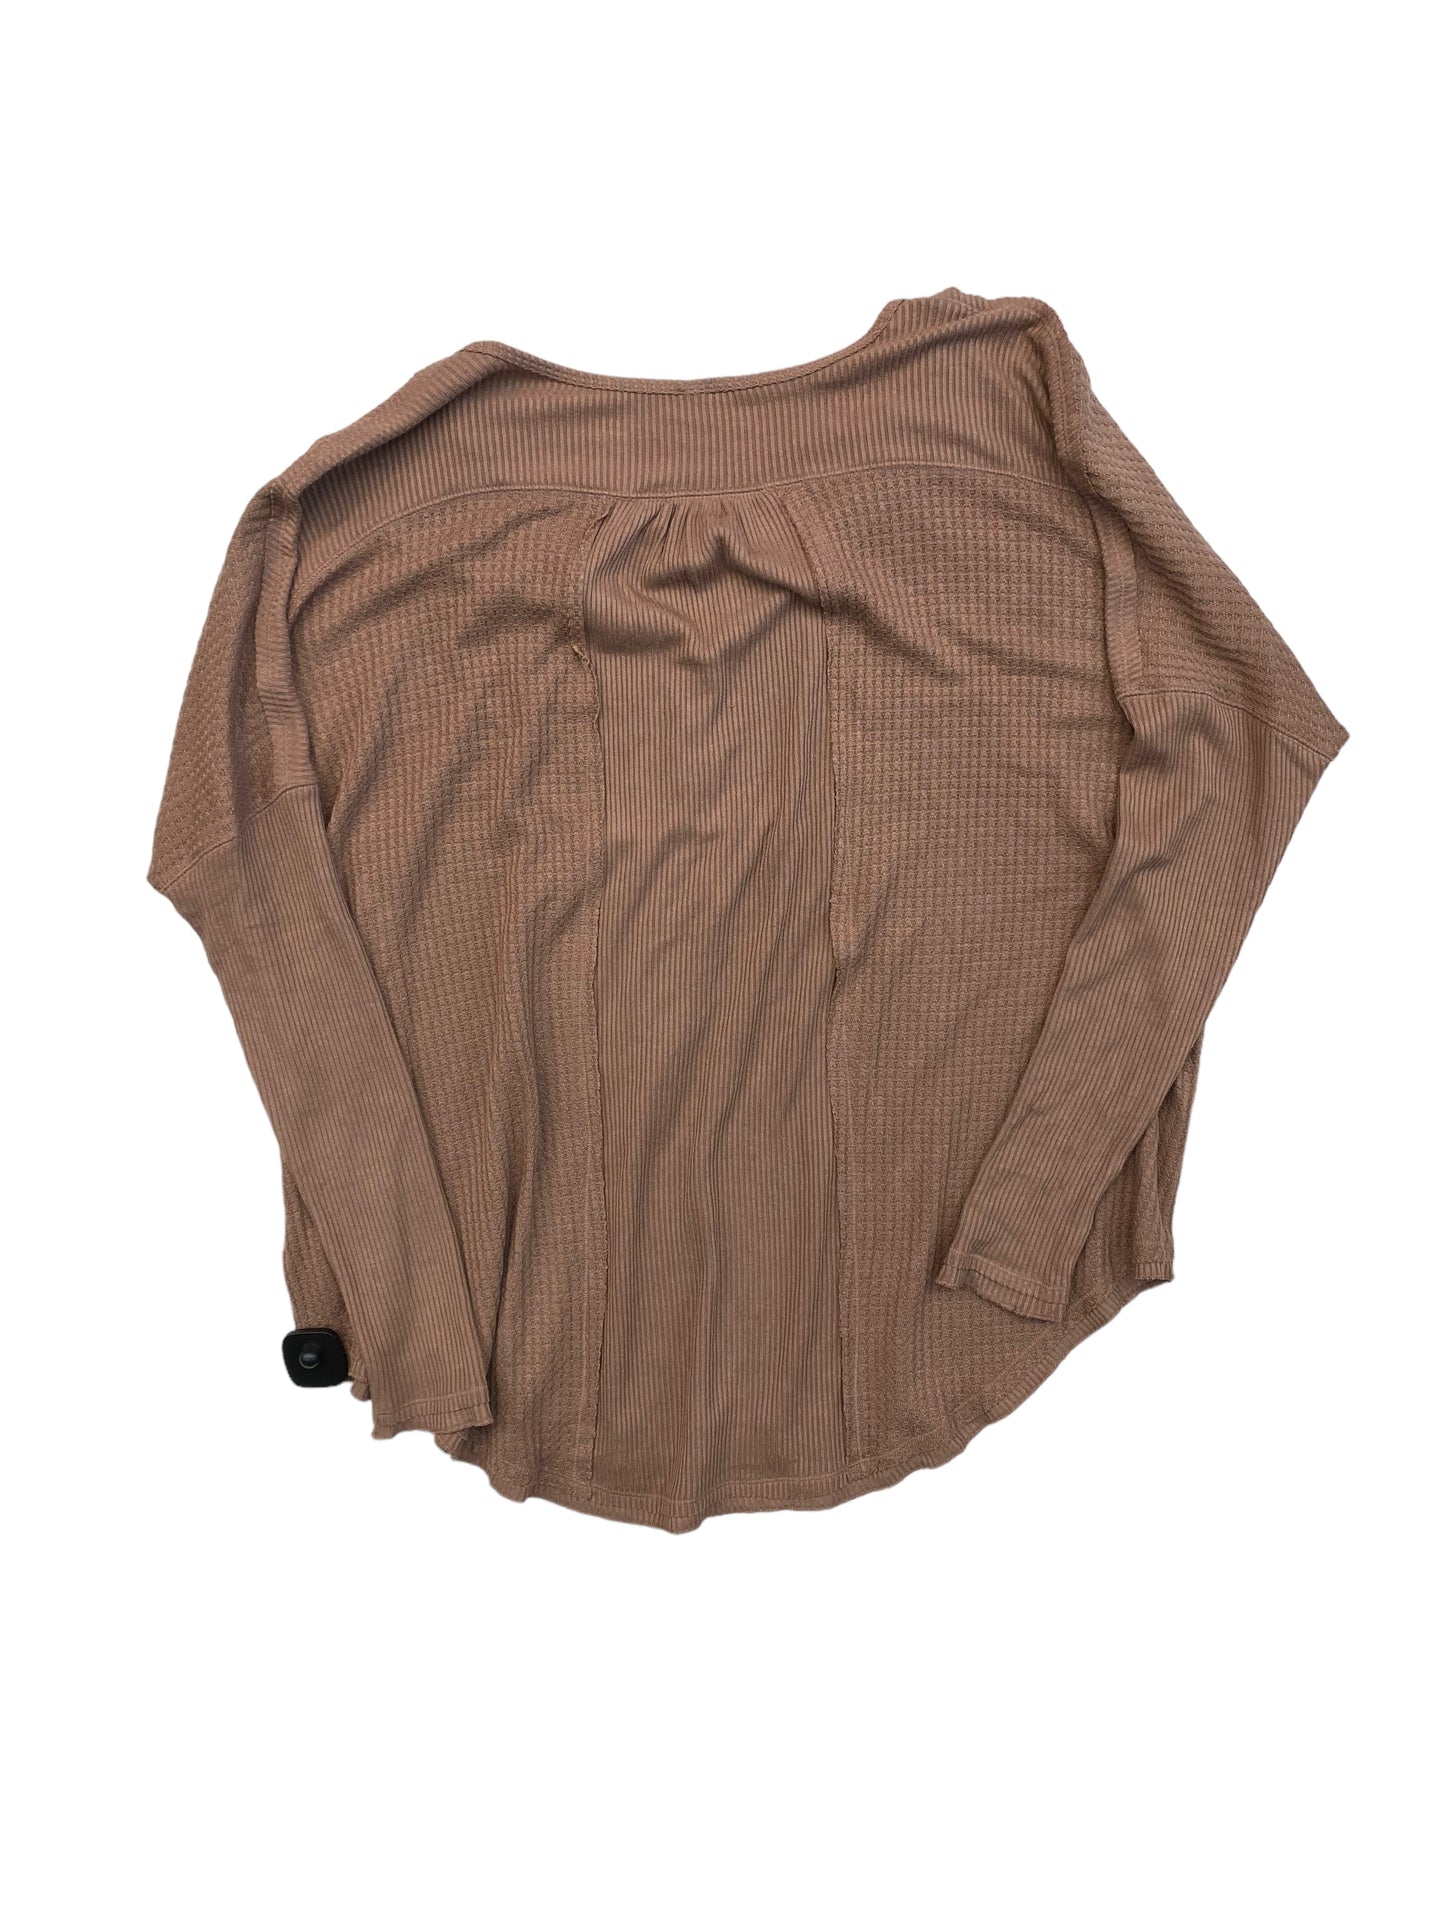 Brown Top Long Sleeve Free People, Size L